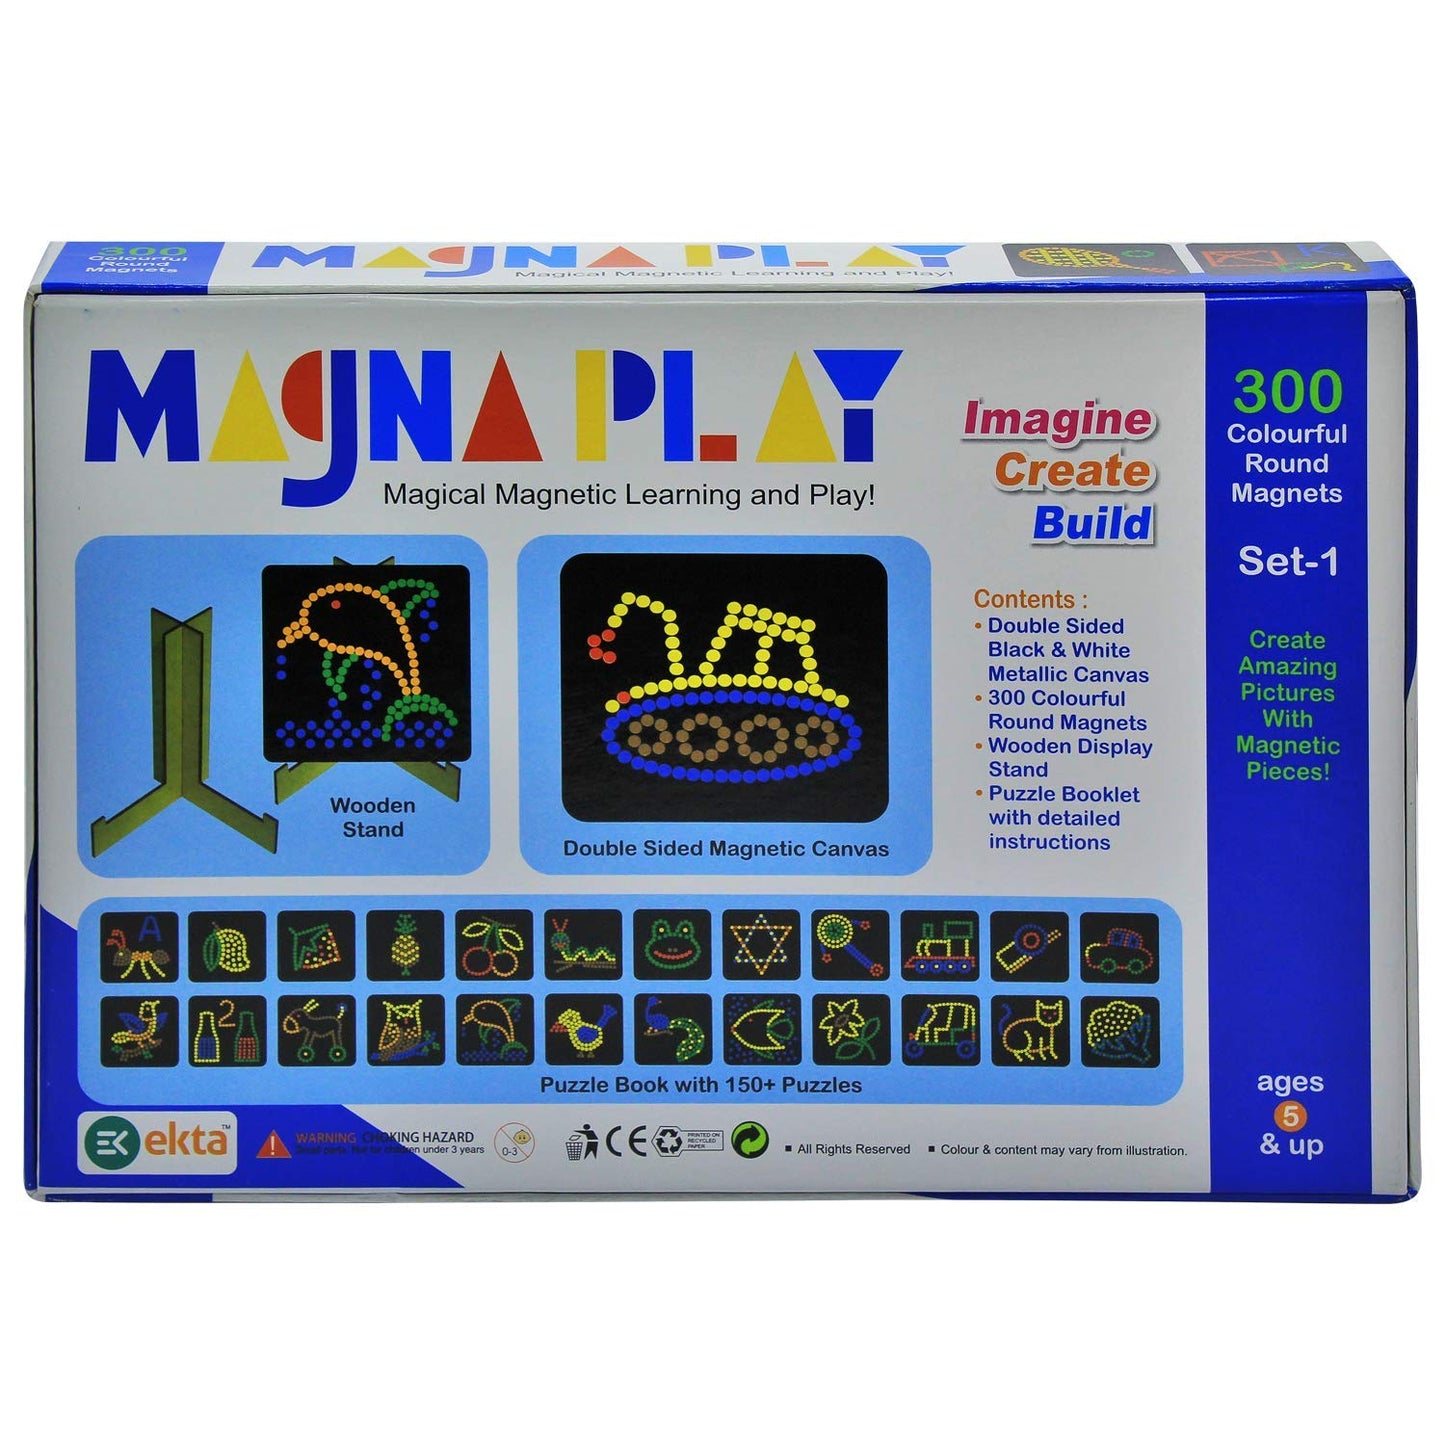 Ekta Magna Play Set - 1: Magnetic Play N Learn Art Draw with Double-sided Wooden Stand, Metallic Canvas & 300 Colourful Puzzles